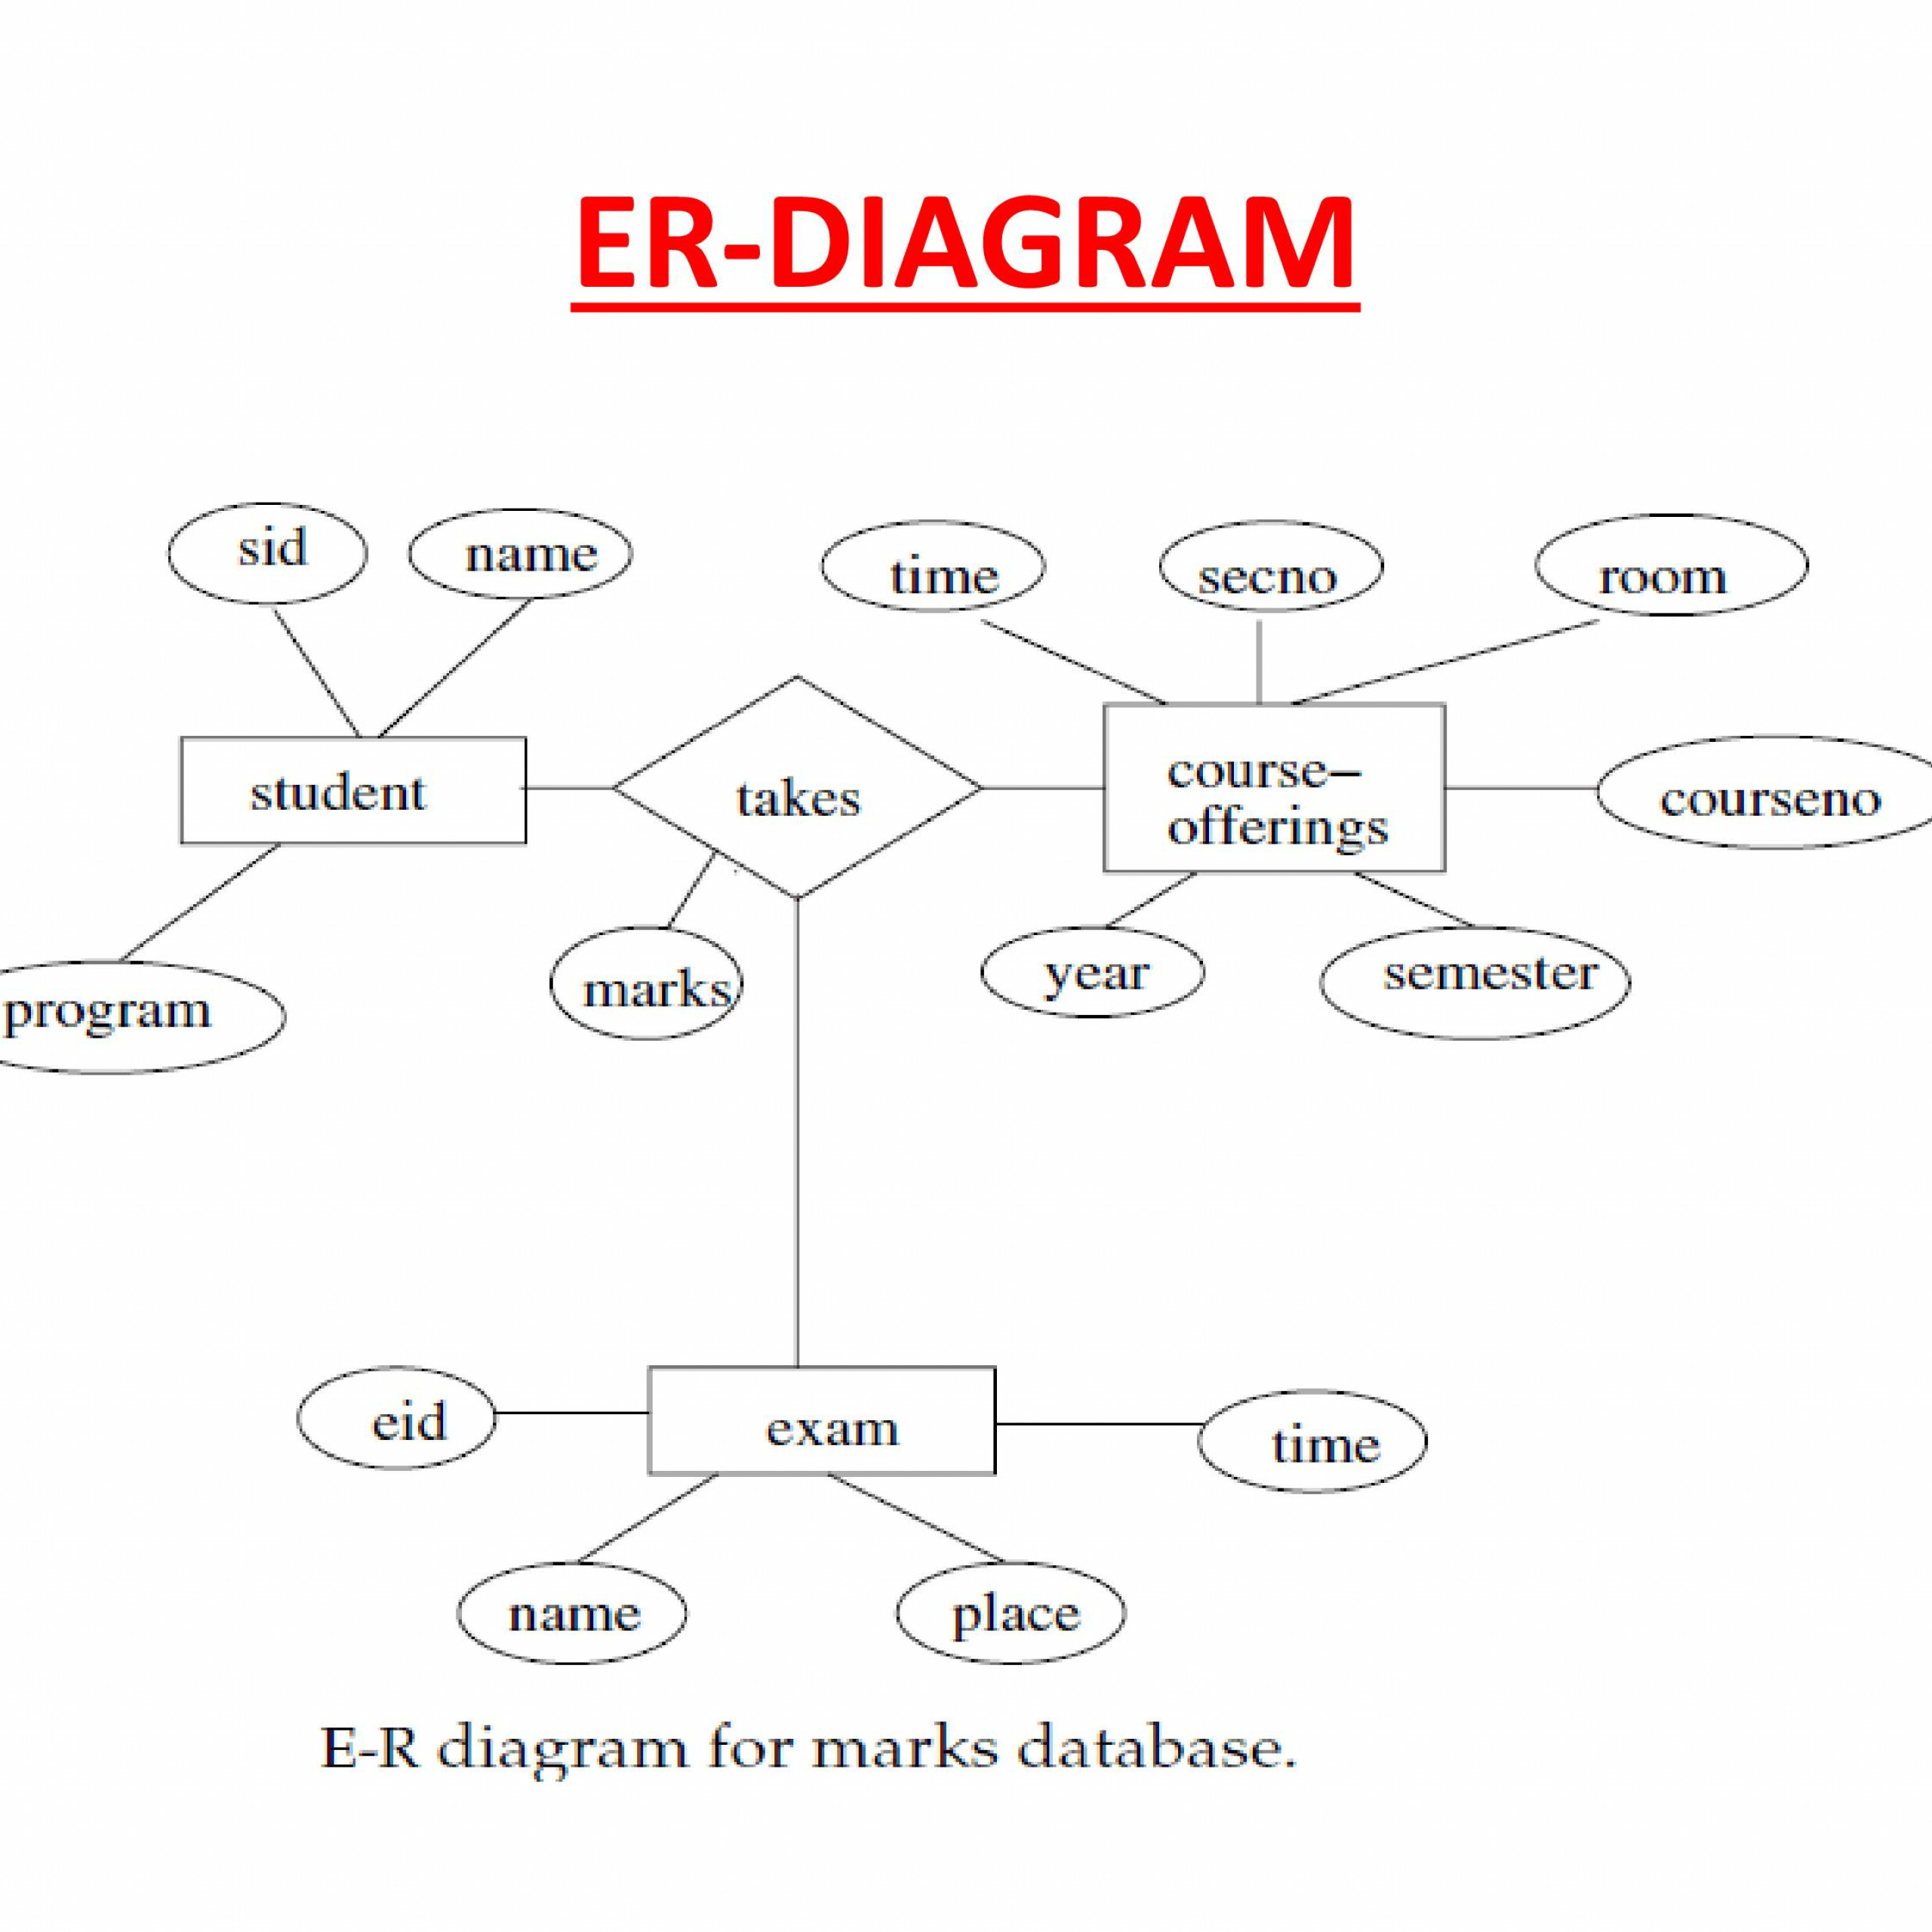 Html, Php, Sql, Css - Powerpoint Slides in Er Diagram W3Schools